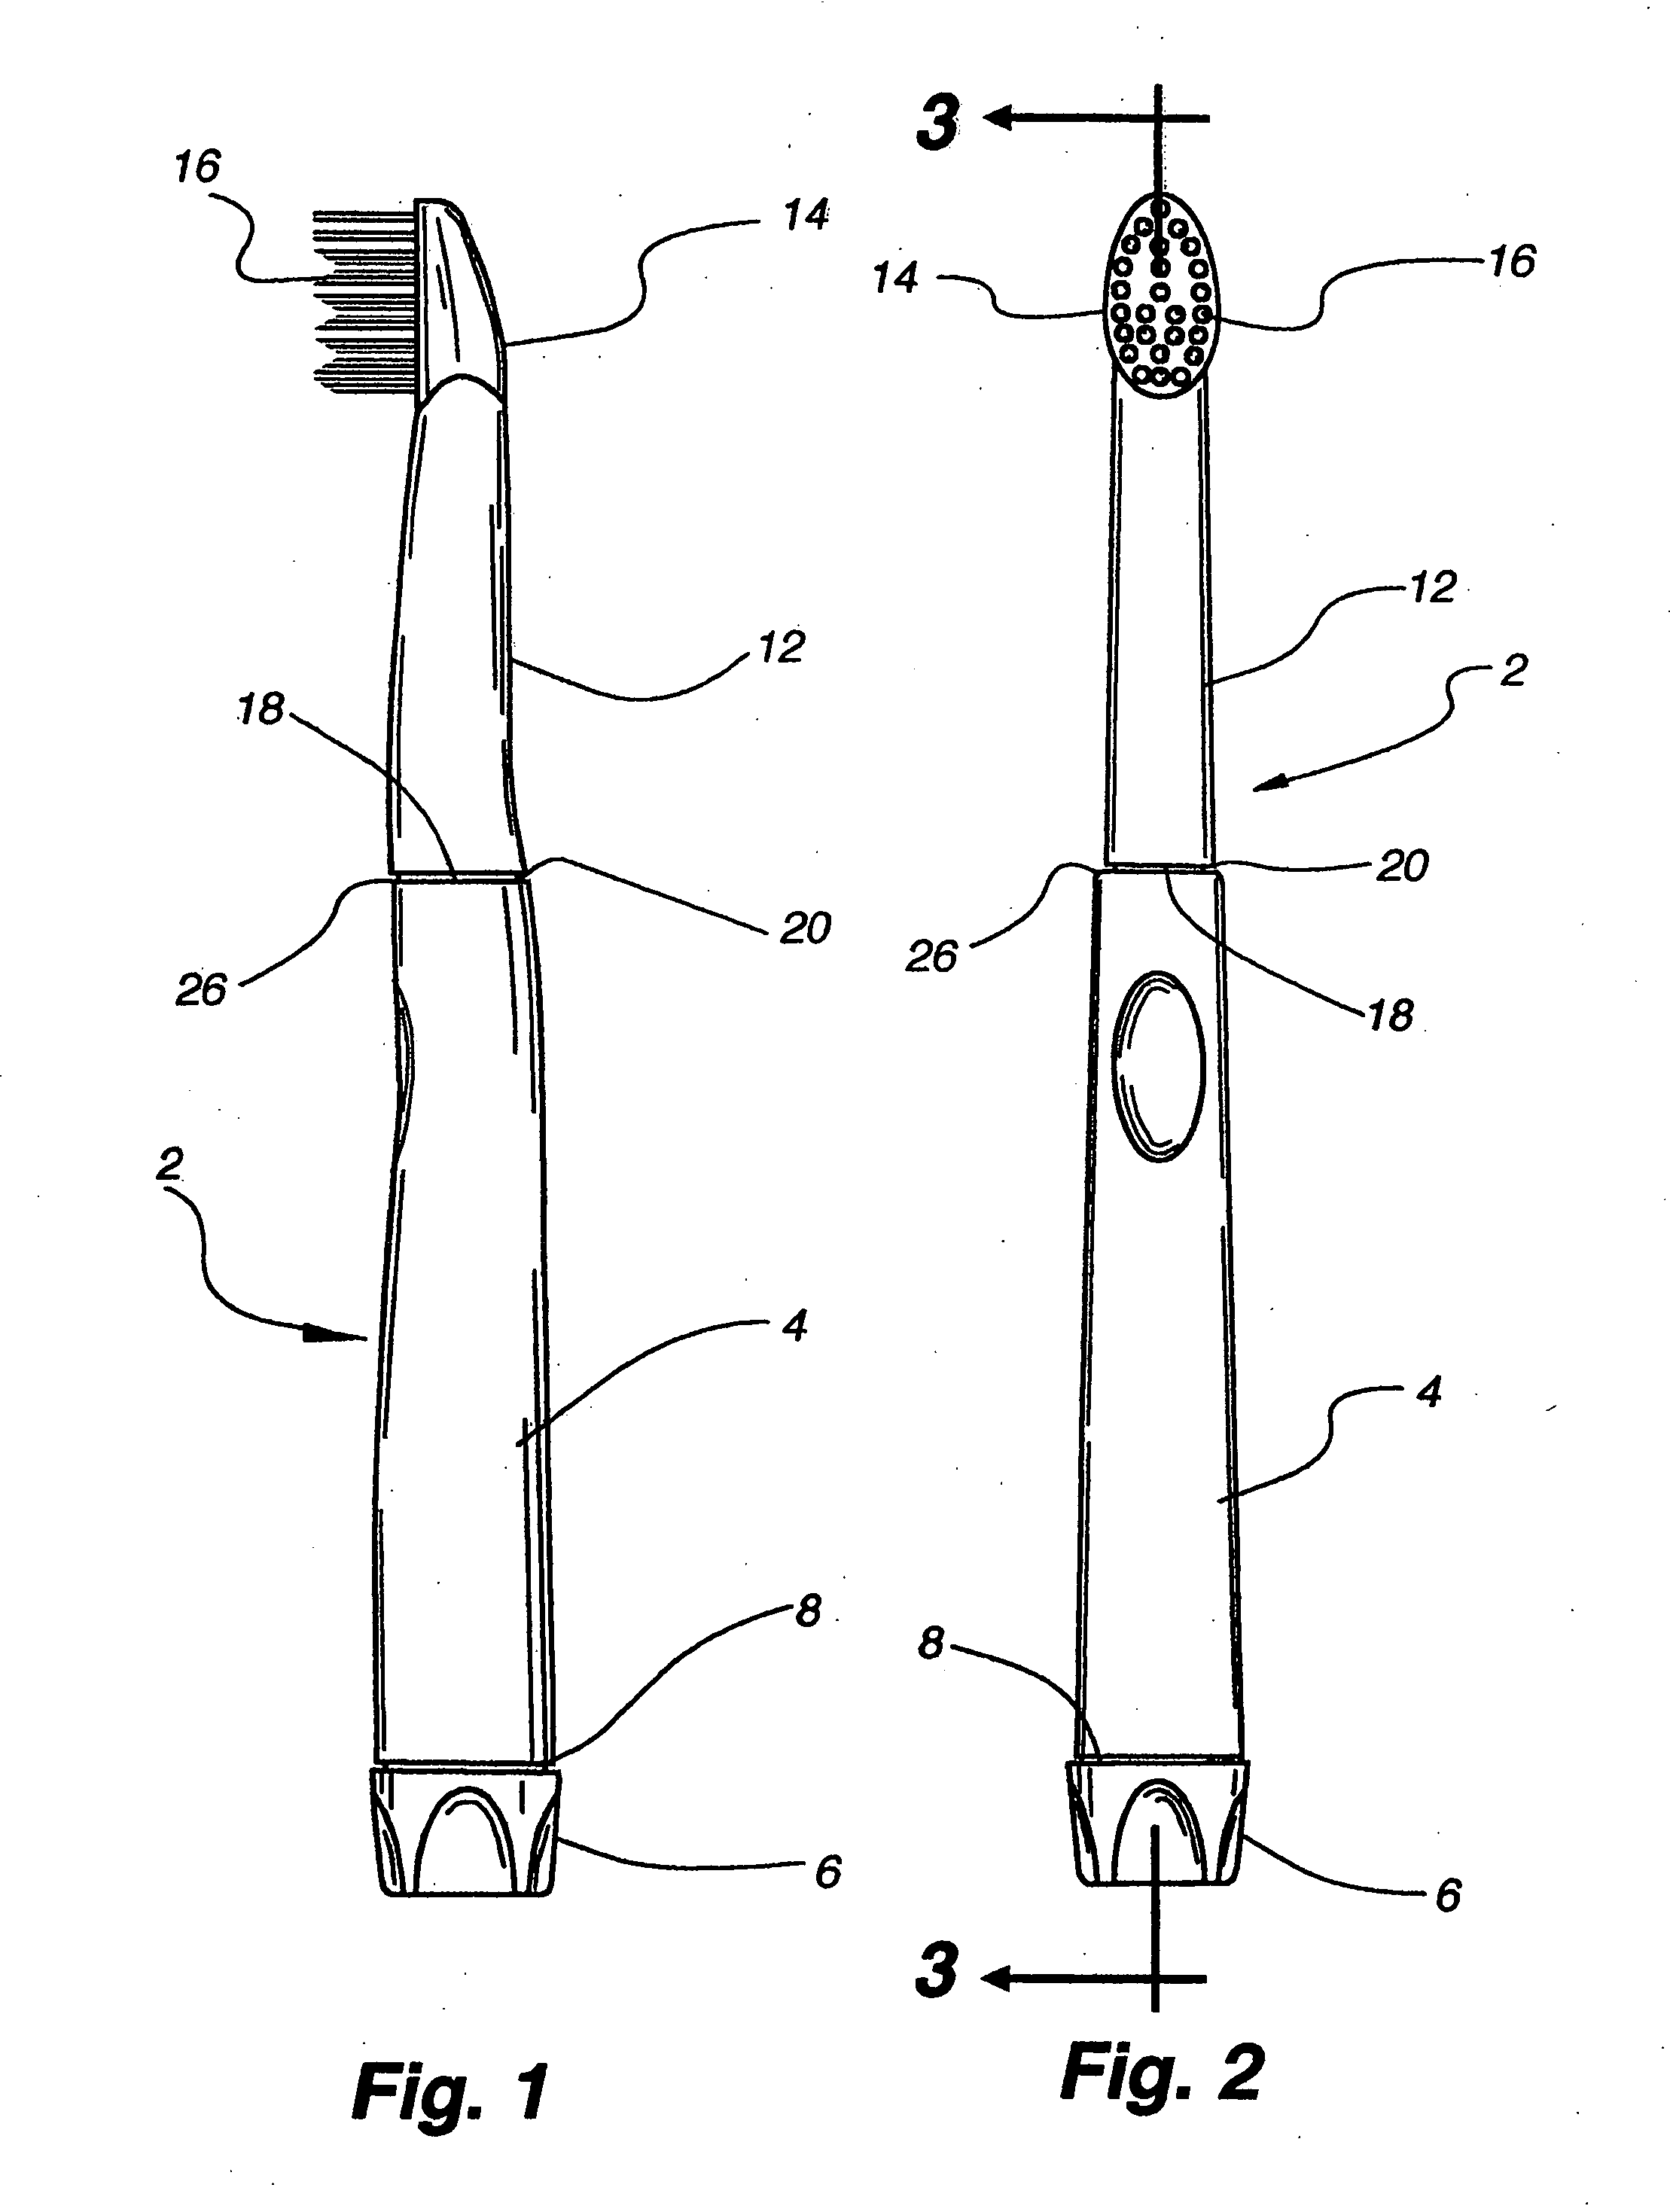 Flosser with motor integrated with vibrating head